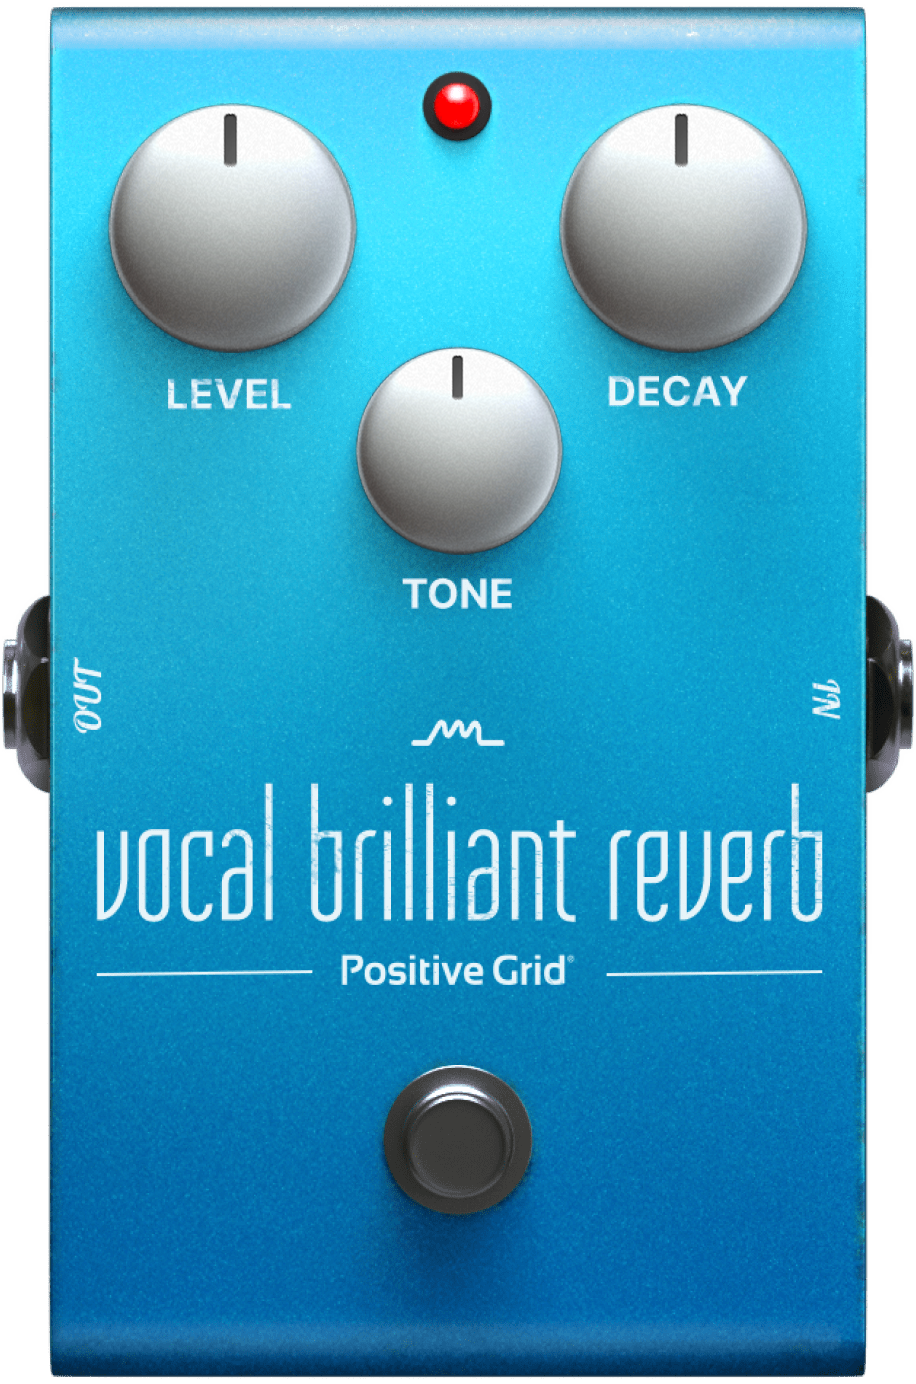 Vocal Brilliant Reverb, inspired by NC